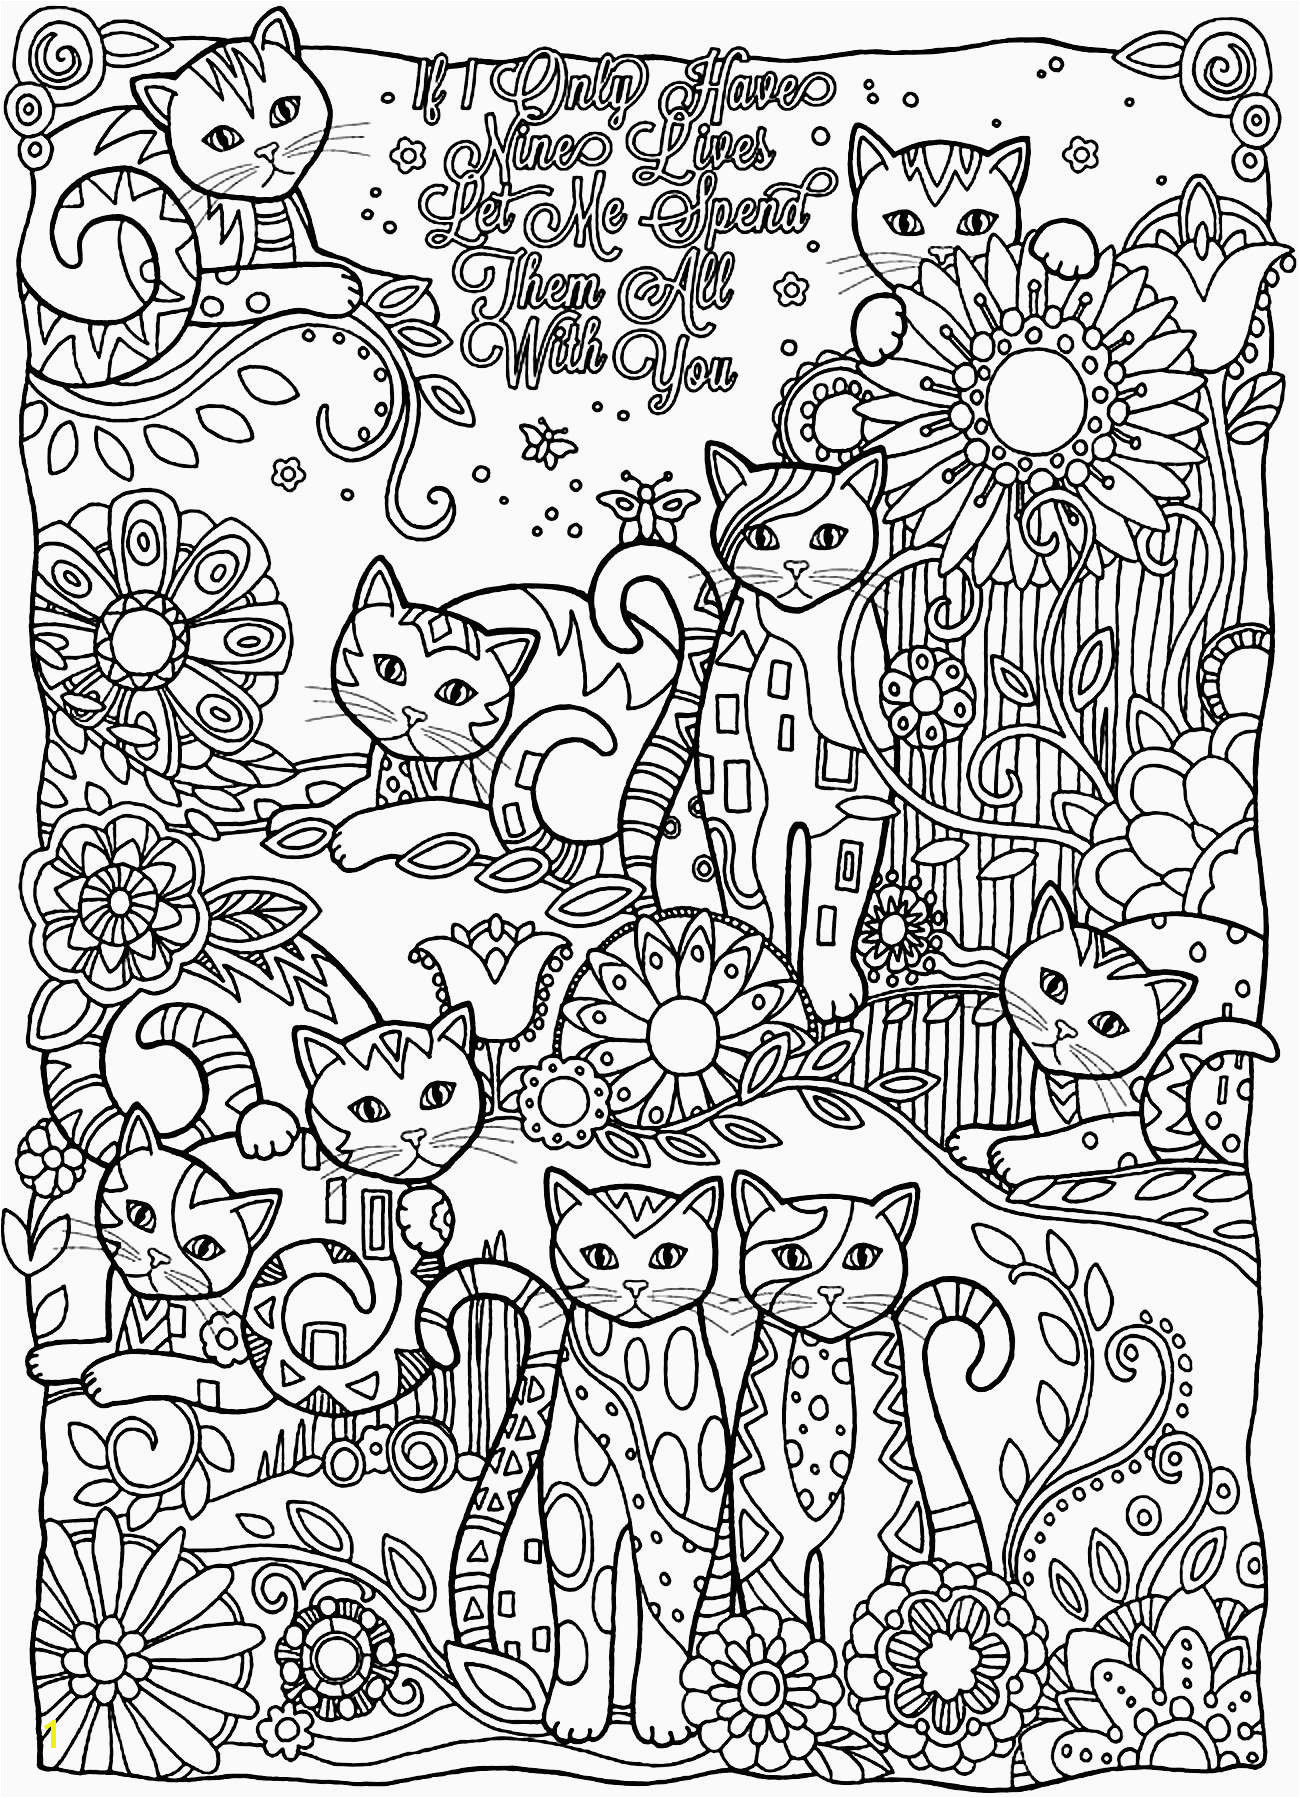 Free Christmas Printable Coloring Pages for Adults Christmas Coloring Pages Printable Luxury Cool Od Dog Coloring